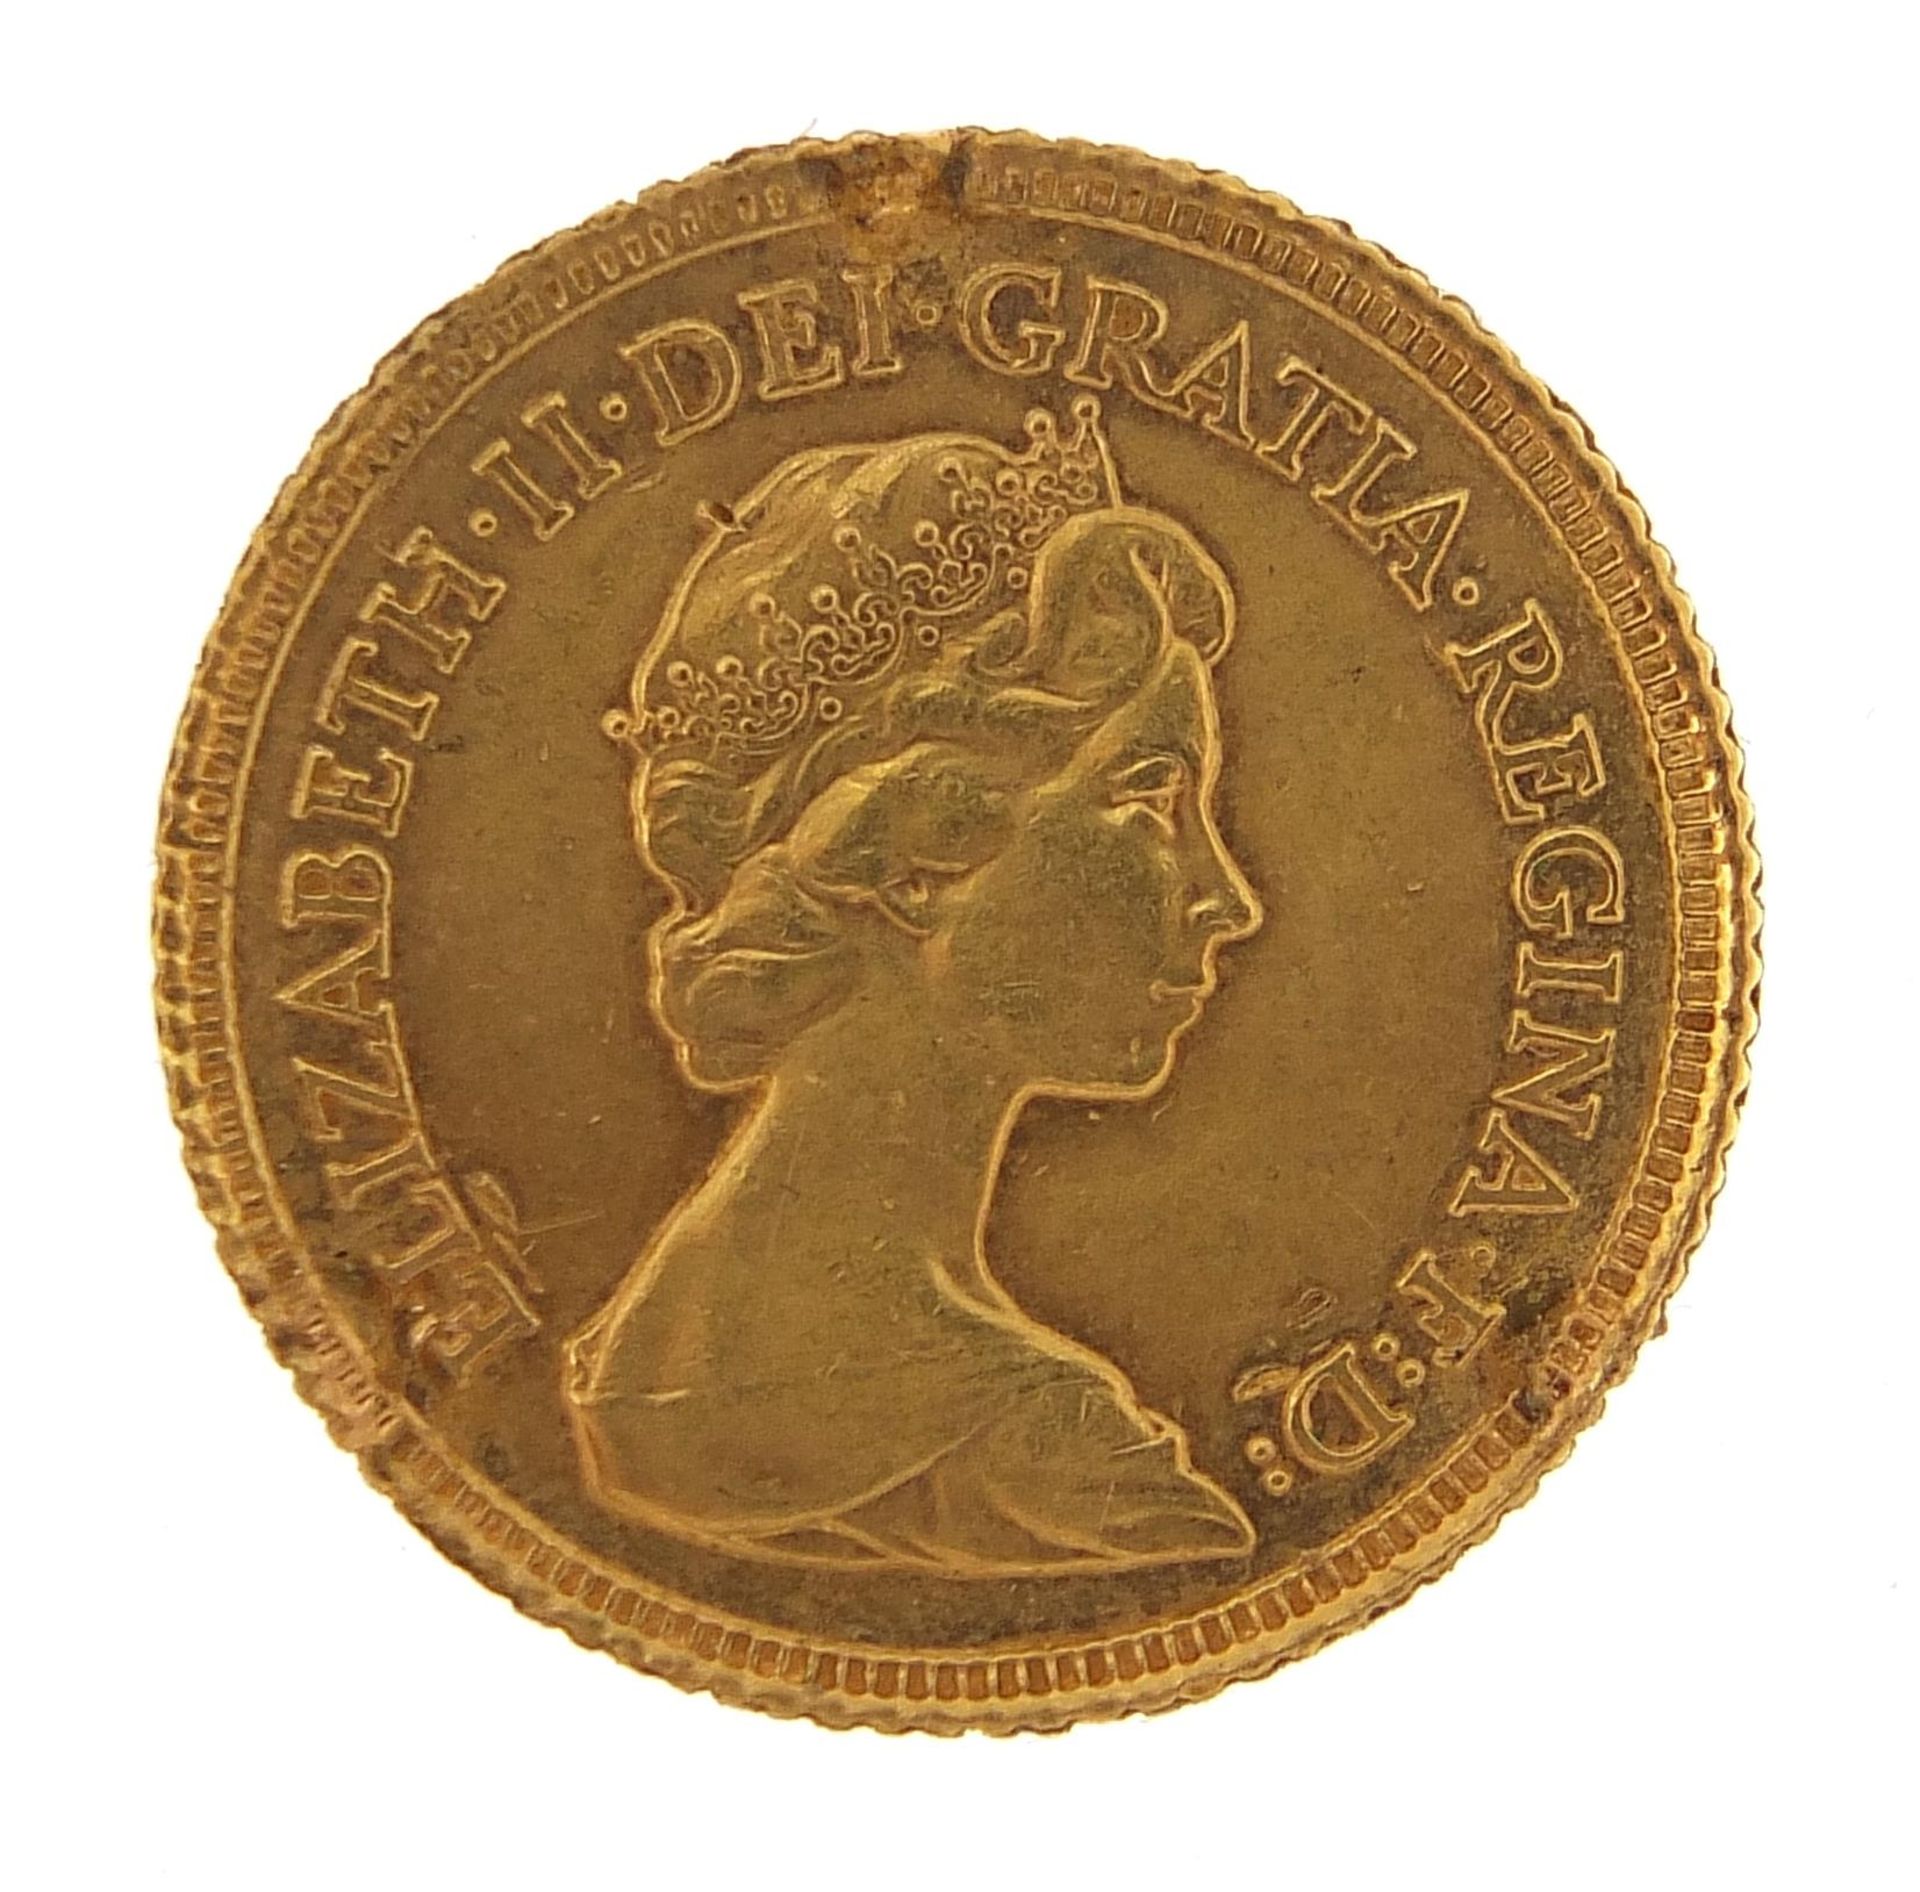 Elizabeth II 1982 gold half sovereign - this lot is sold without buyer's premium - Image 2 of 3